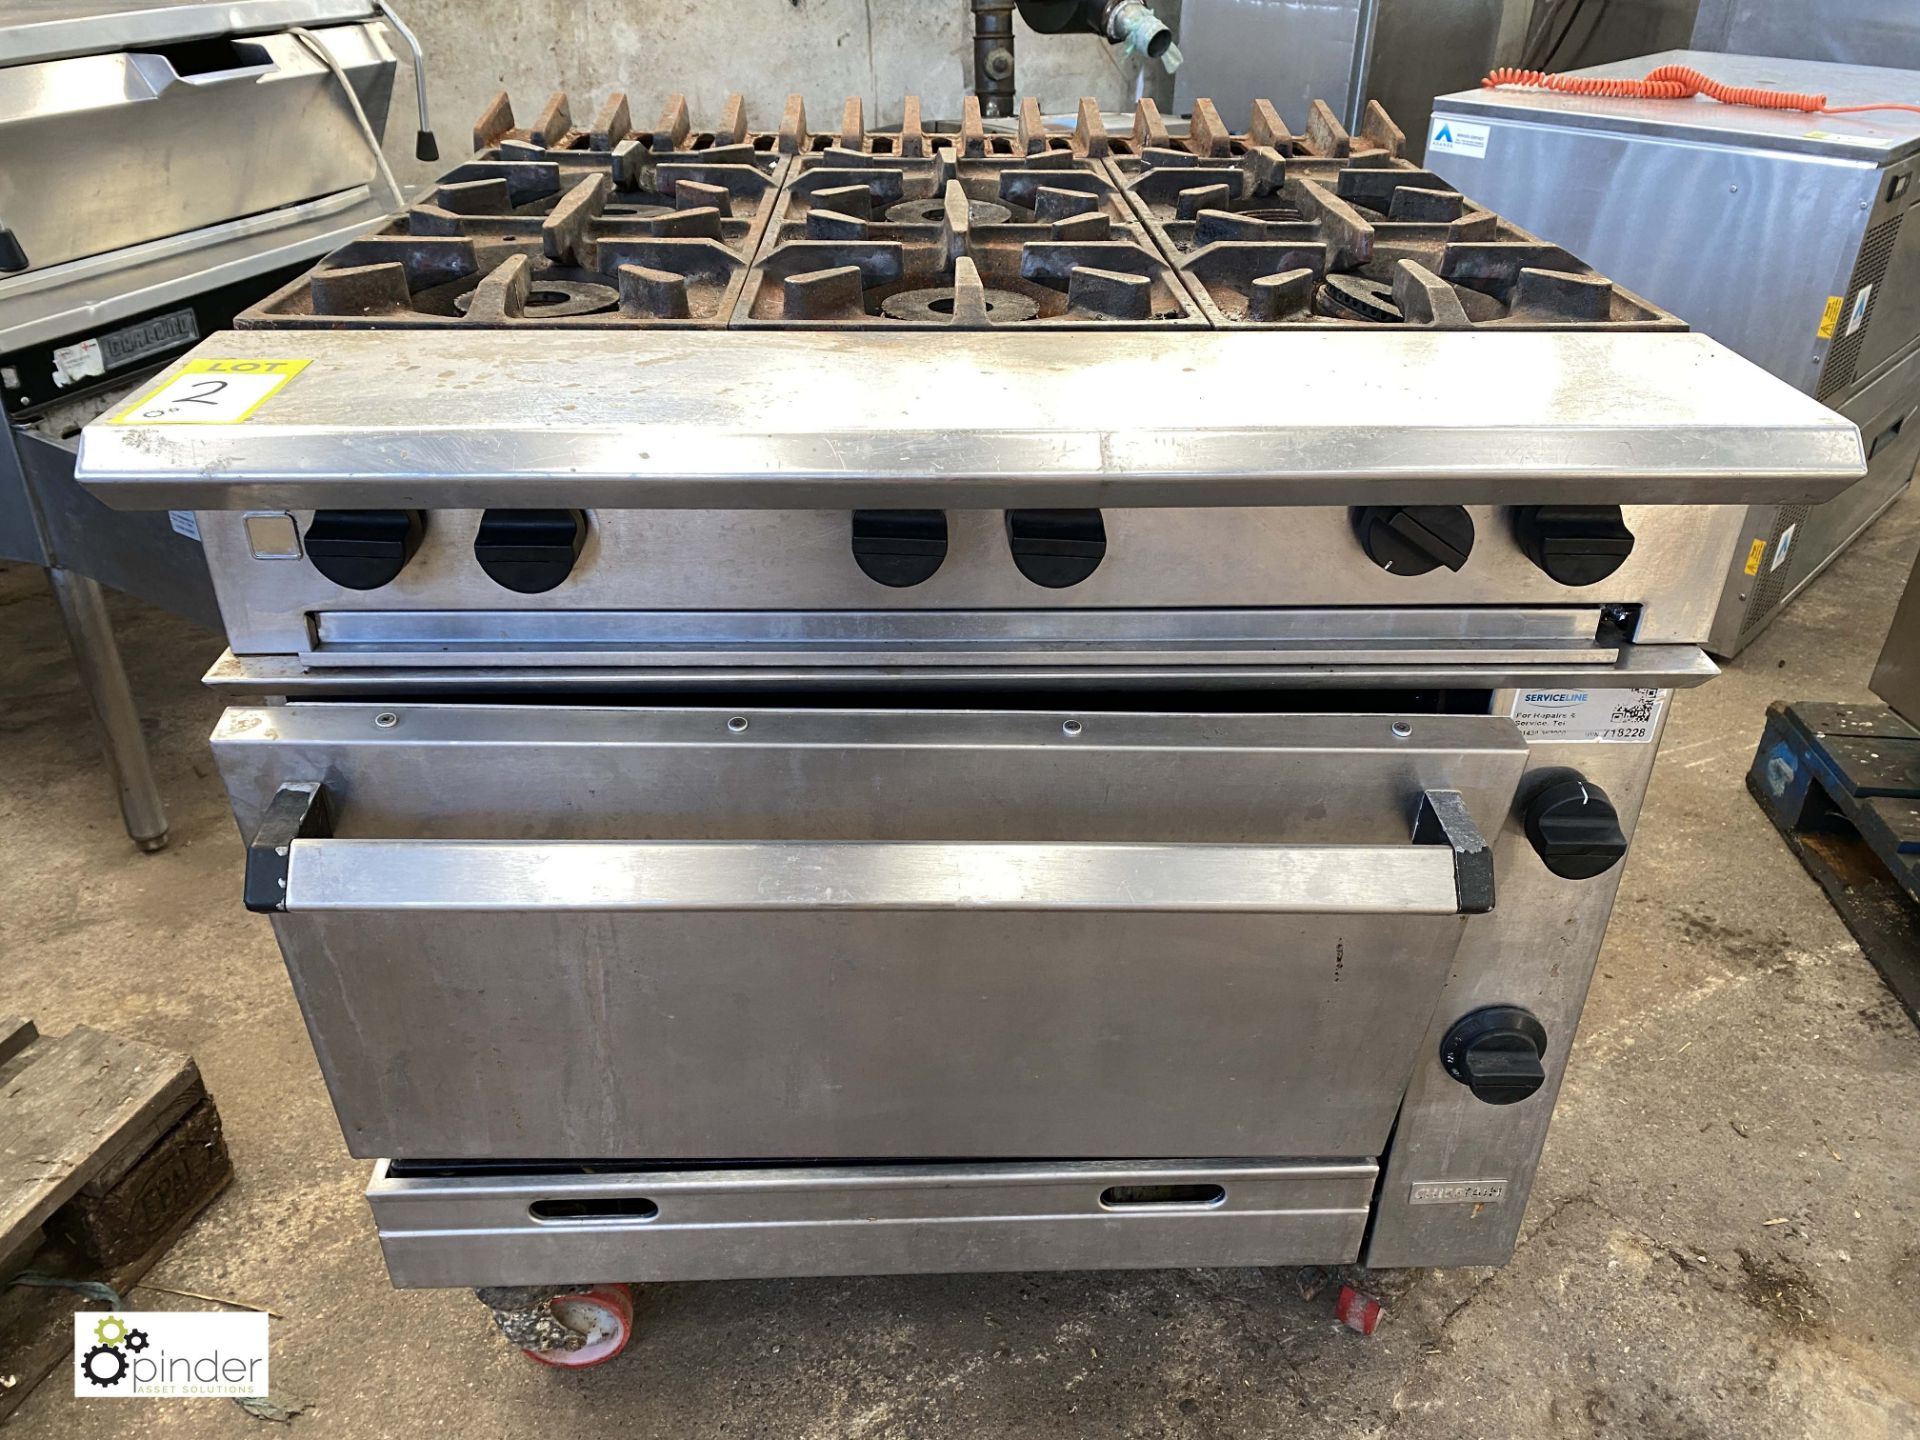 Chieftain stainless steel mobile 6-ring single door Gas Range (LOCATION: Croxton) / (please note